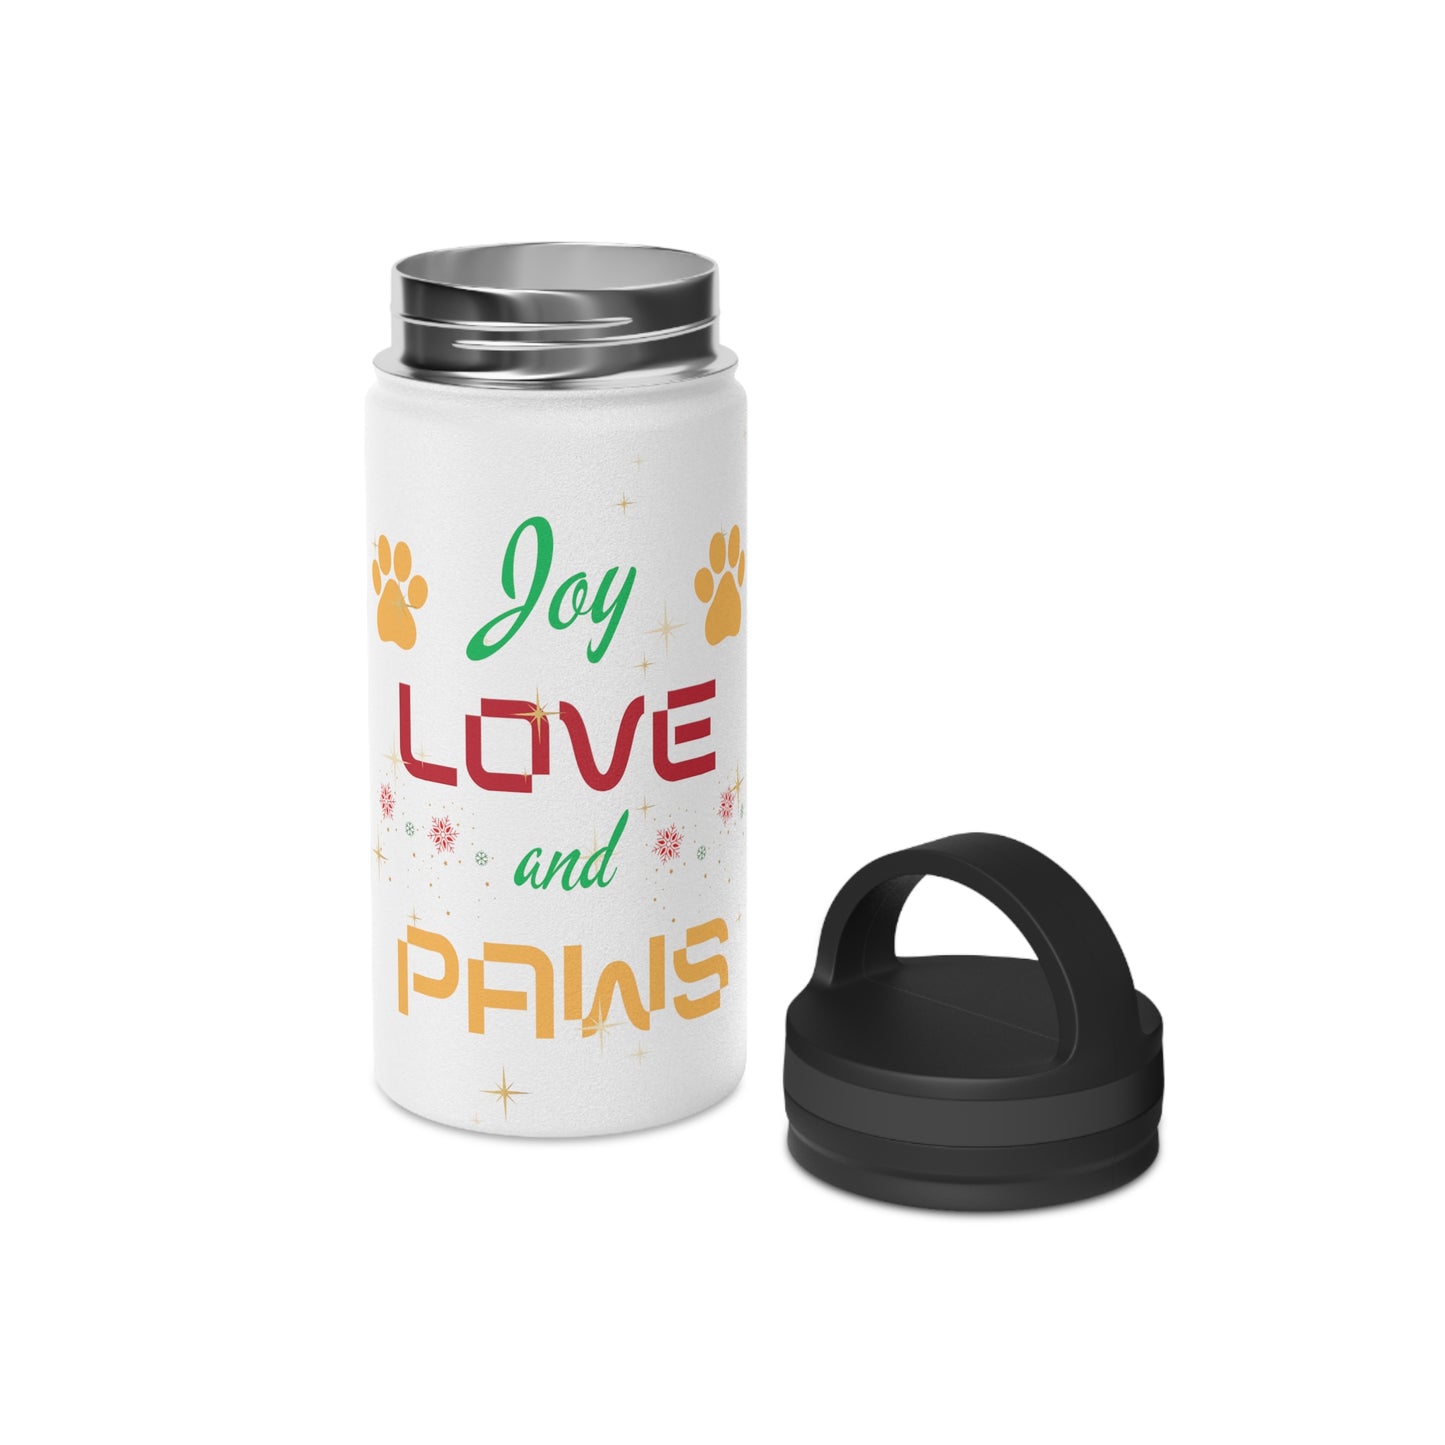 Joy, Love and Paws Stainless Steel Water Bottle, Handle Lid